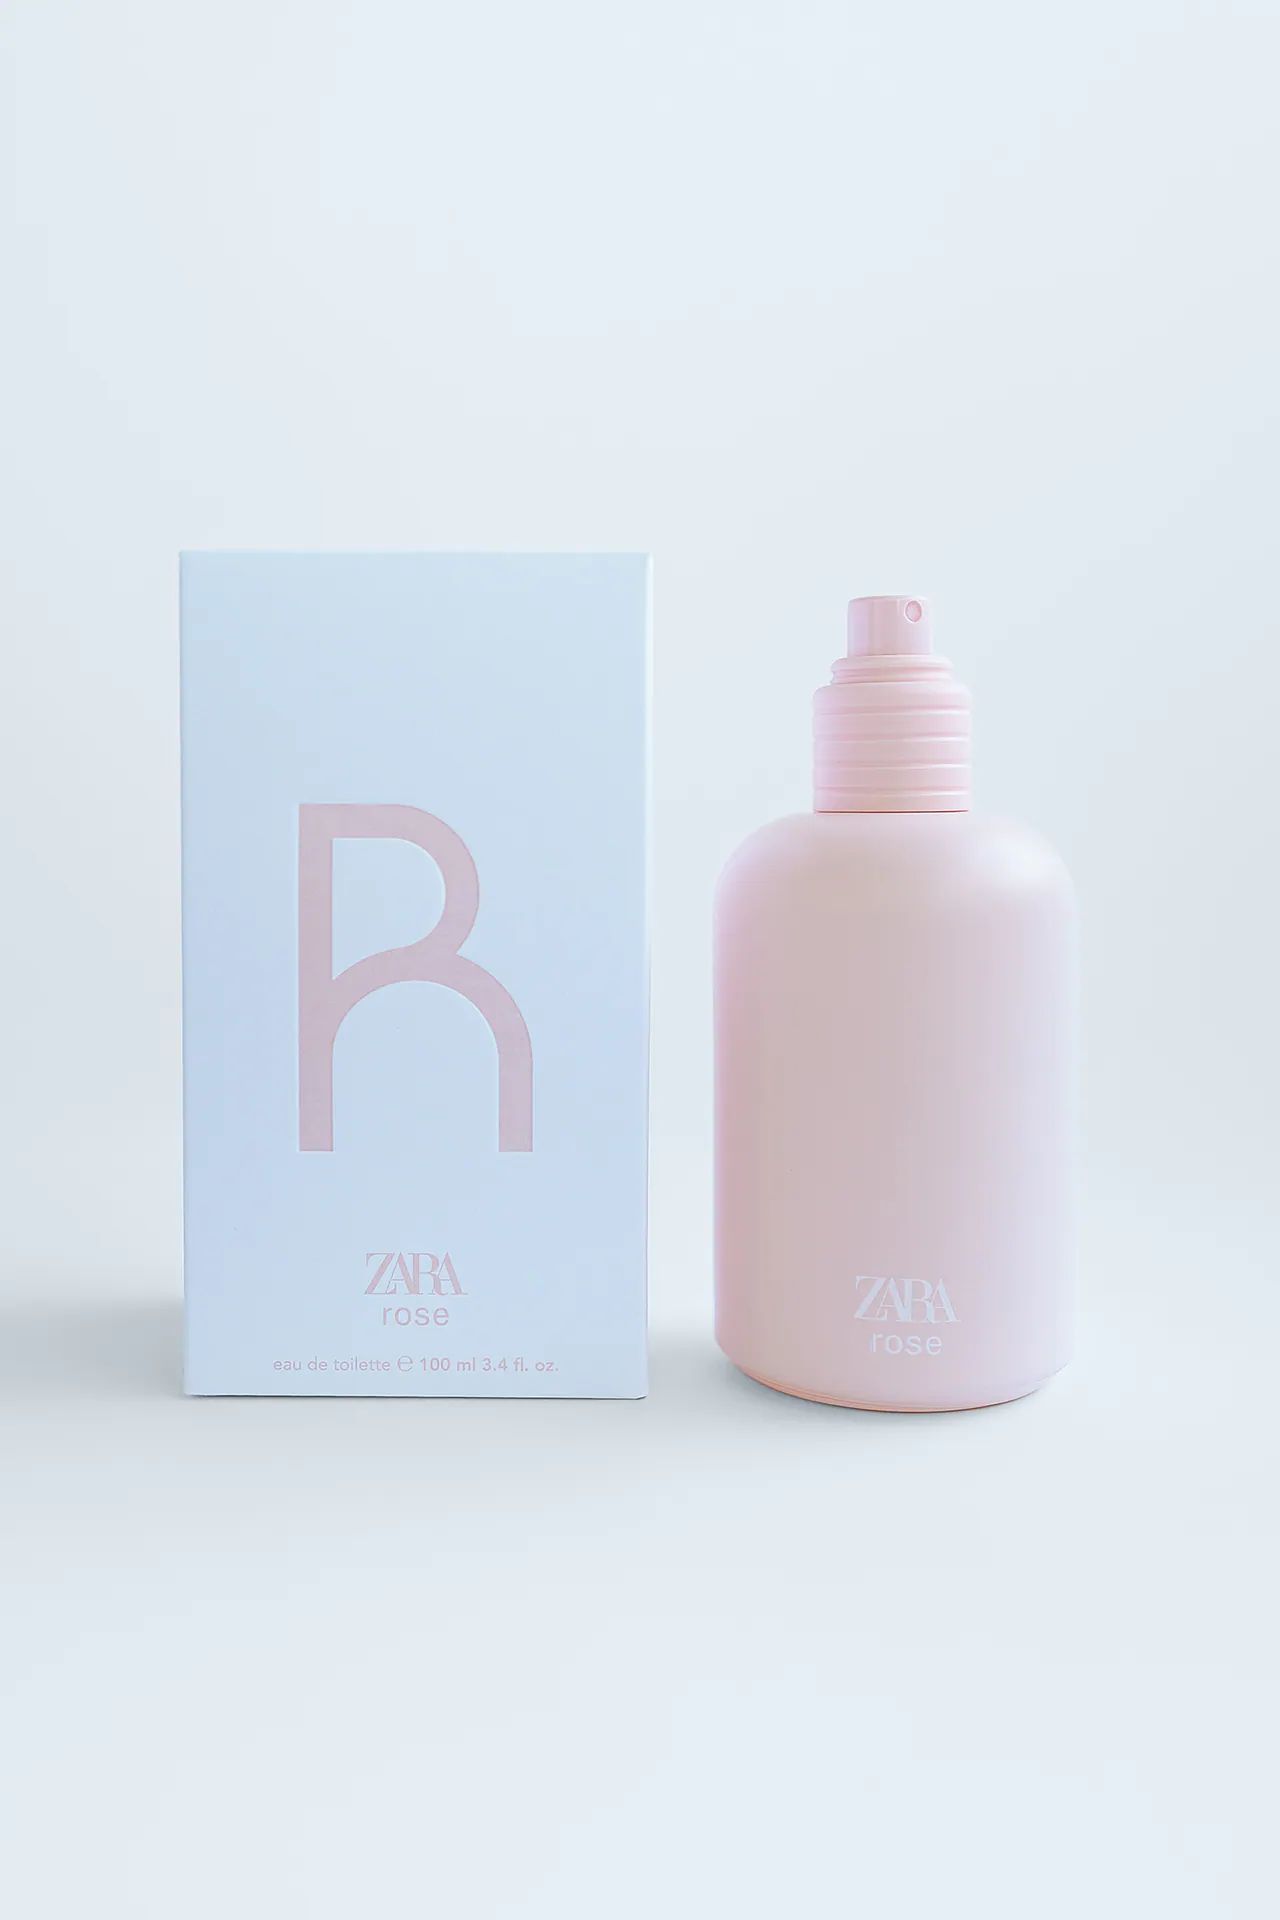 R Rose by Zara is a Floral fragrance for women. 